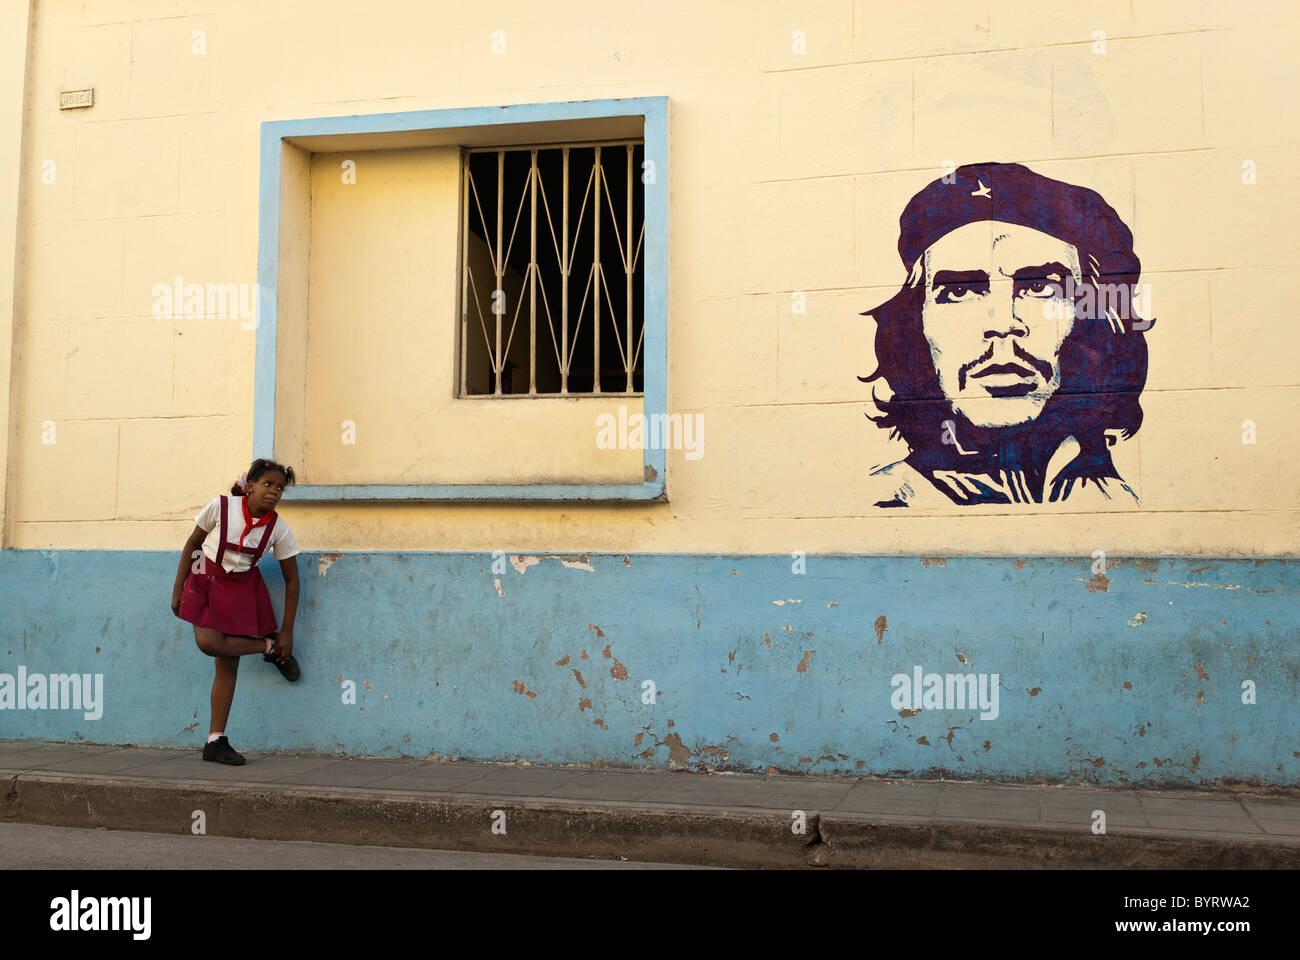 Girl in a school uniform close to a painting of Che Guevara, Camaguey, Cuba, Caribbean. Stock Photo